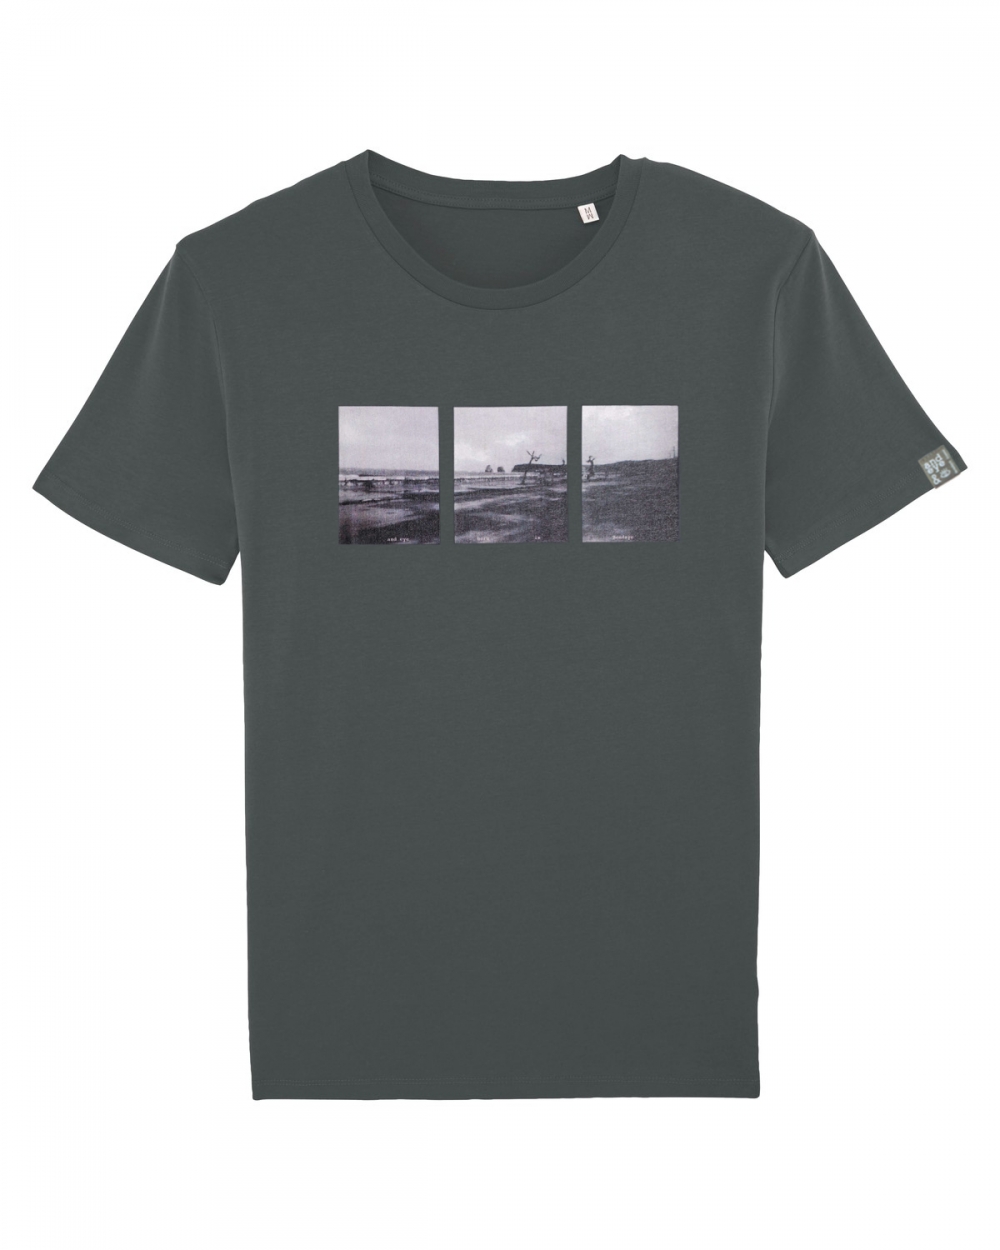 Organic classic t-shirt with a vintage image of Hendaye